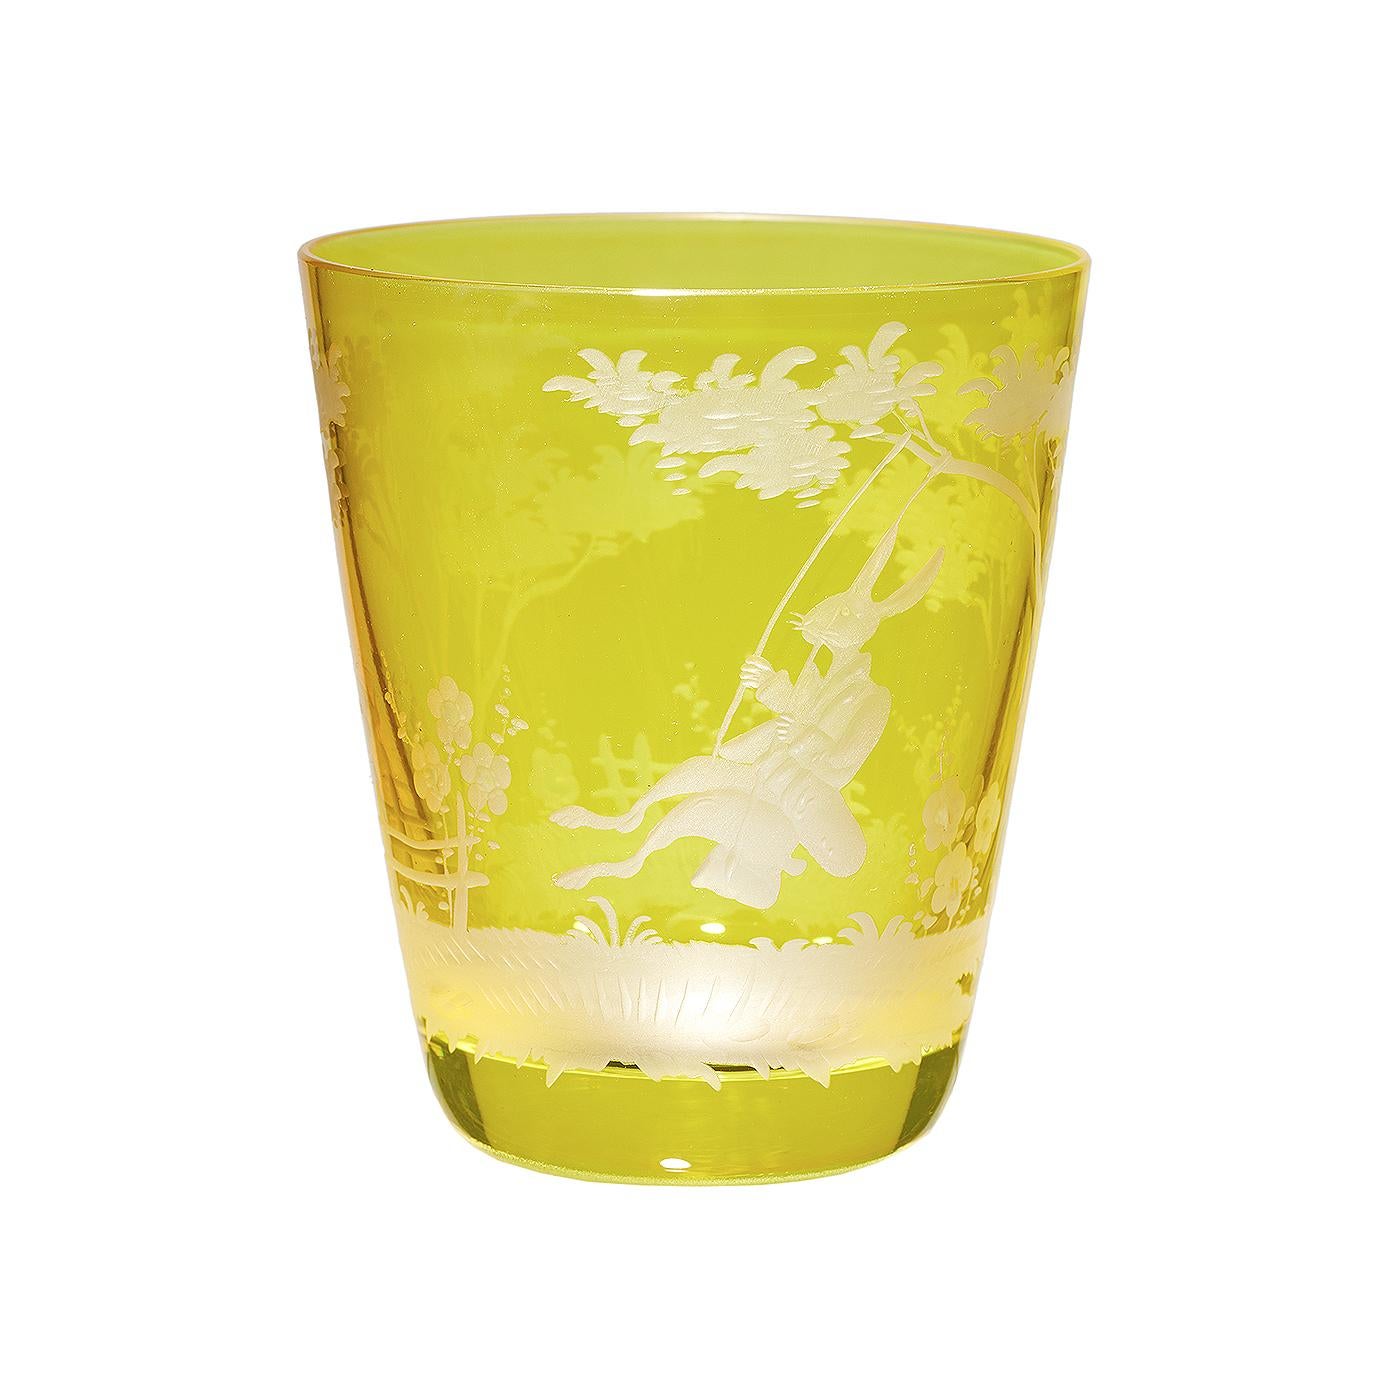 Set of six hand blown tumbler in yellow crystal with a hand-edged  Easter decor in country style. The decor shows a hand-engraved charming vintage Easter decor all-over the glass. Handmade in Bavaria/Germany. Can be ordered in different colors.